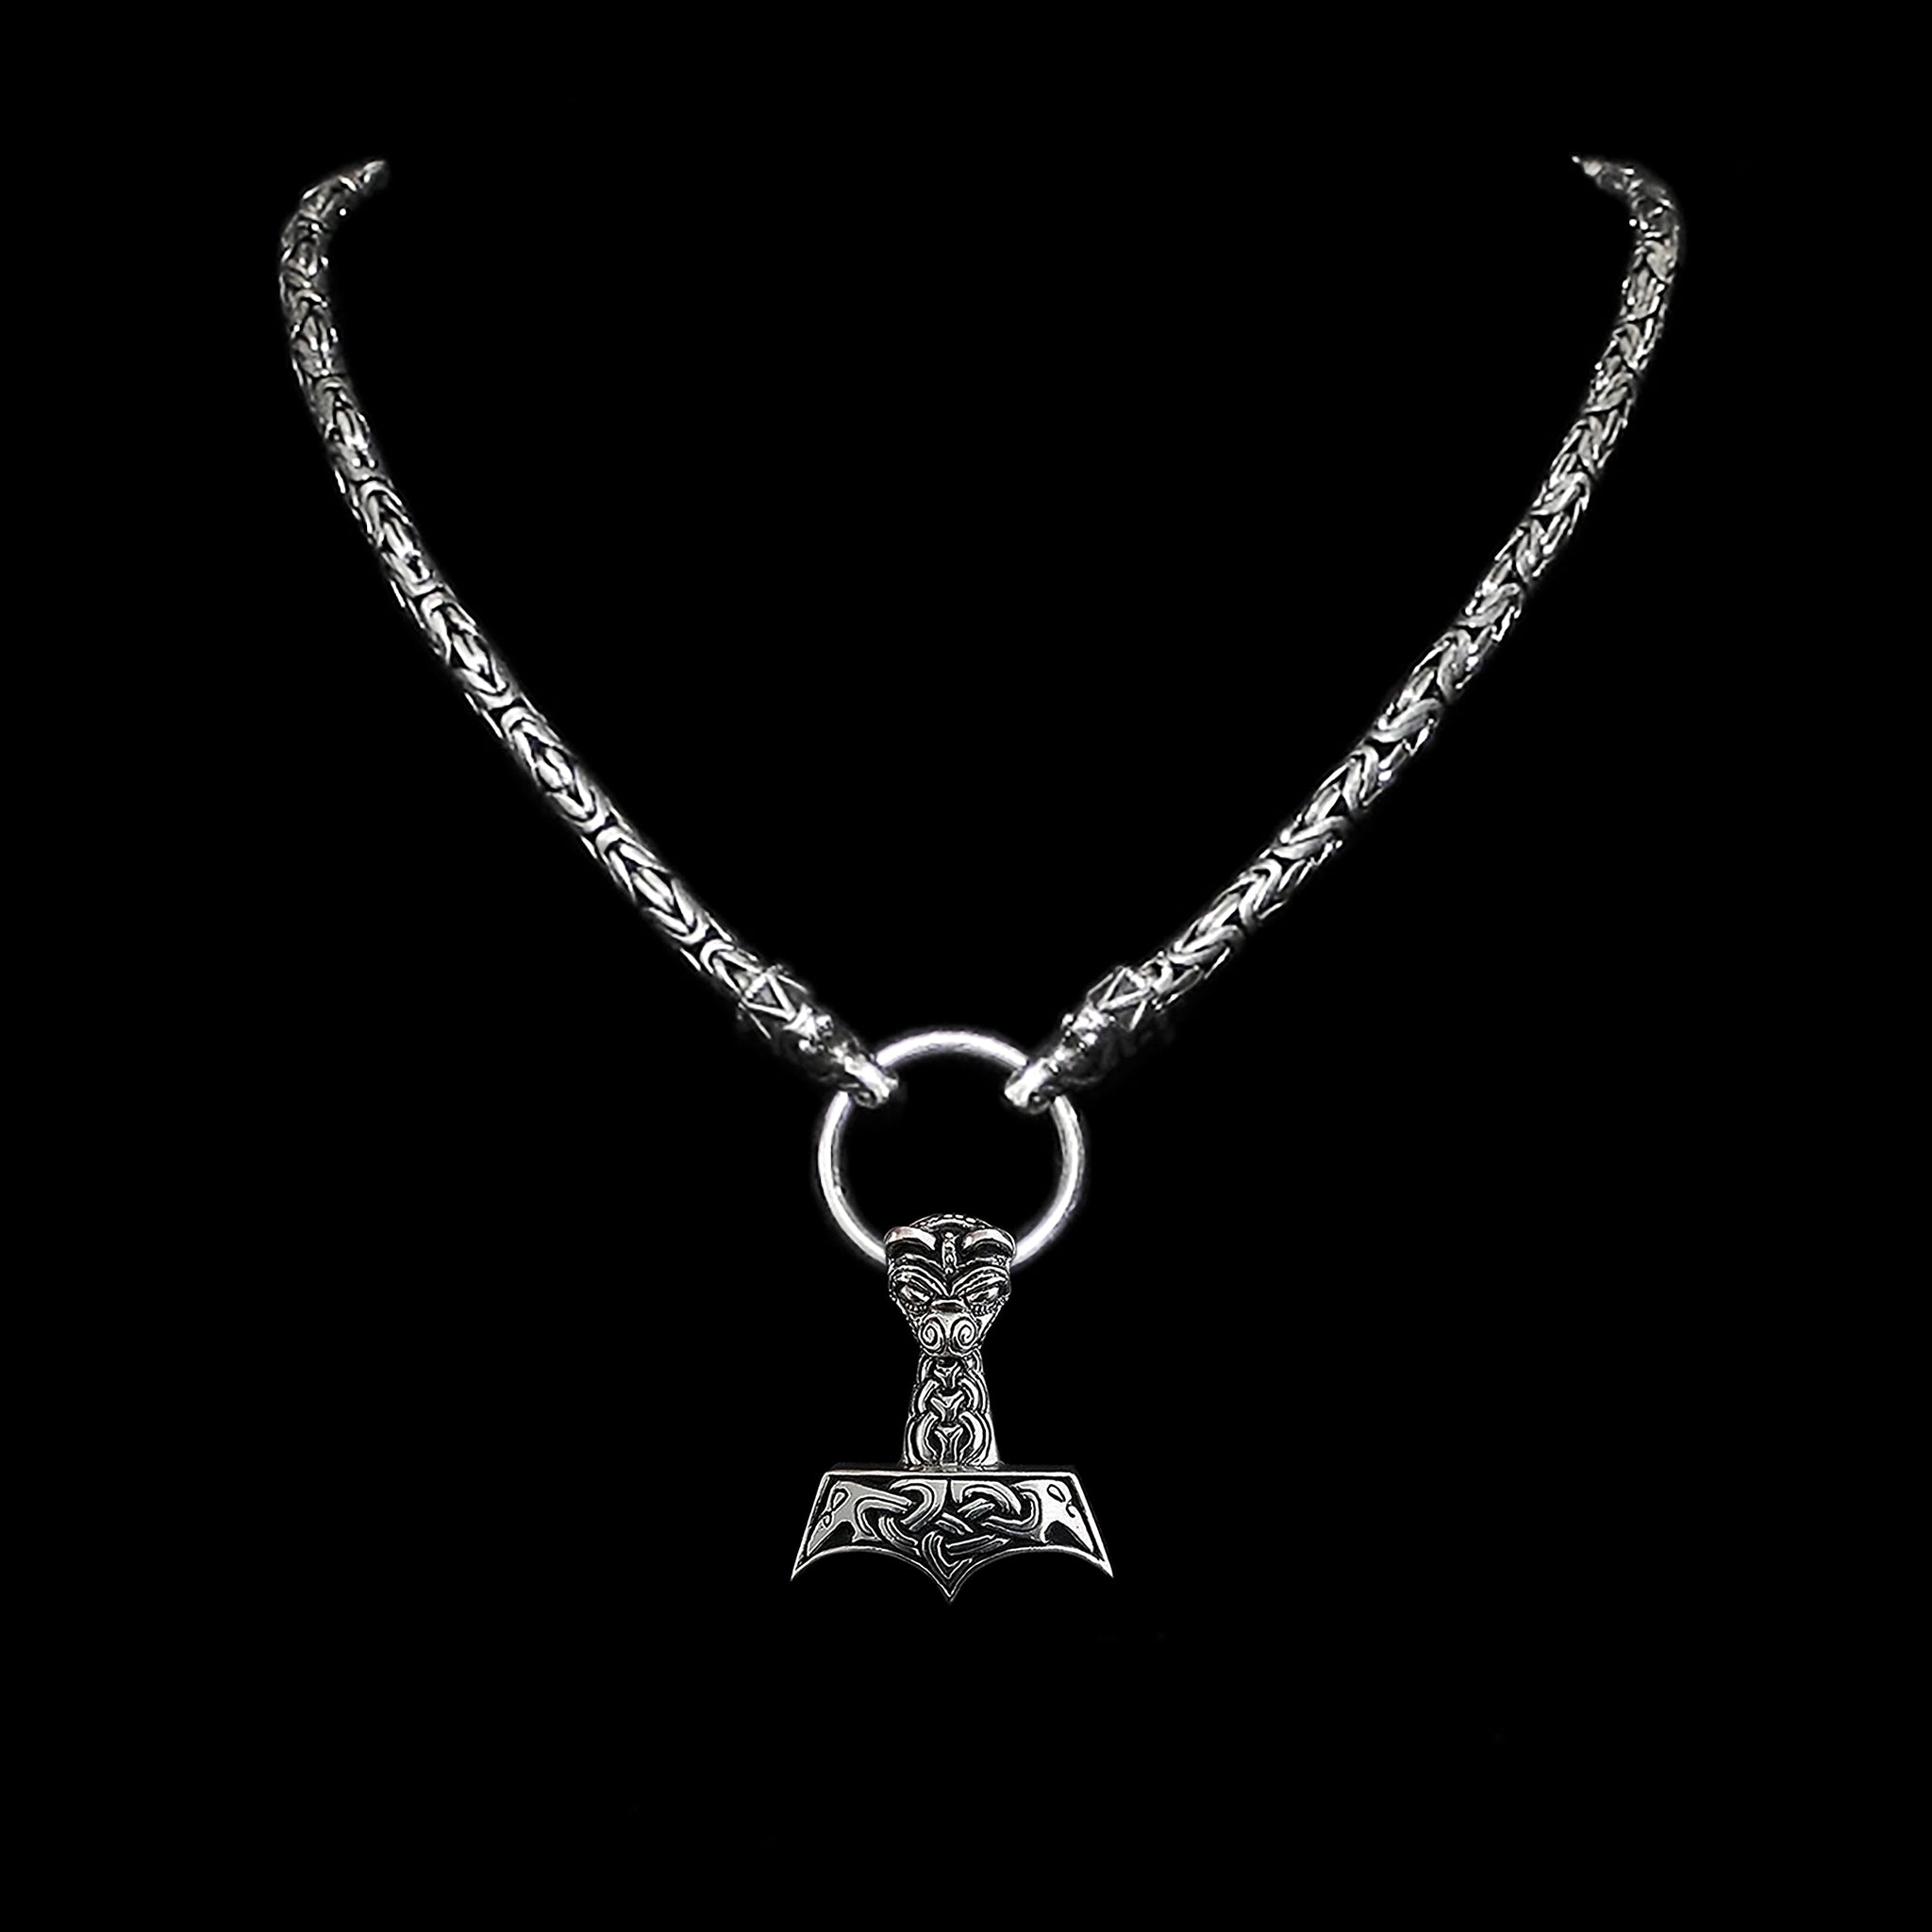 5mm Thick Silver King Chain Thors Hammer Necklace - Gotland Dragon Heads - Large & Ferocious Thors Hammer